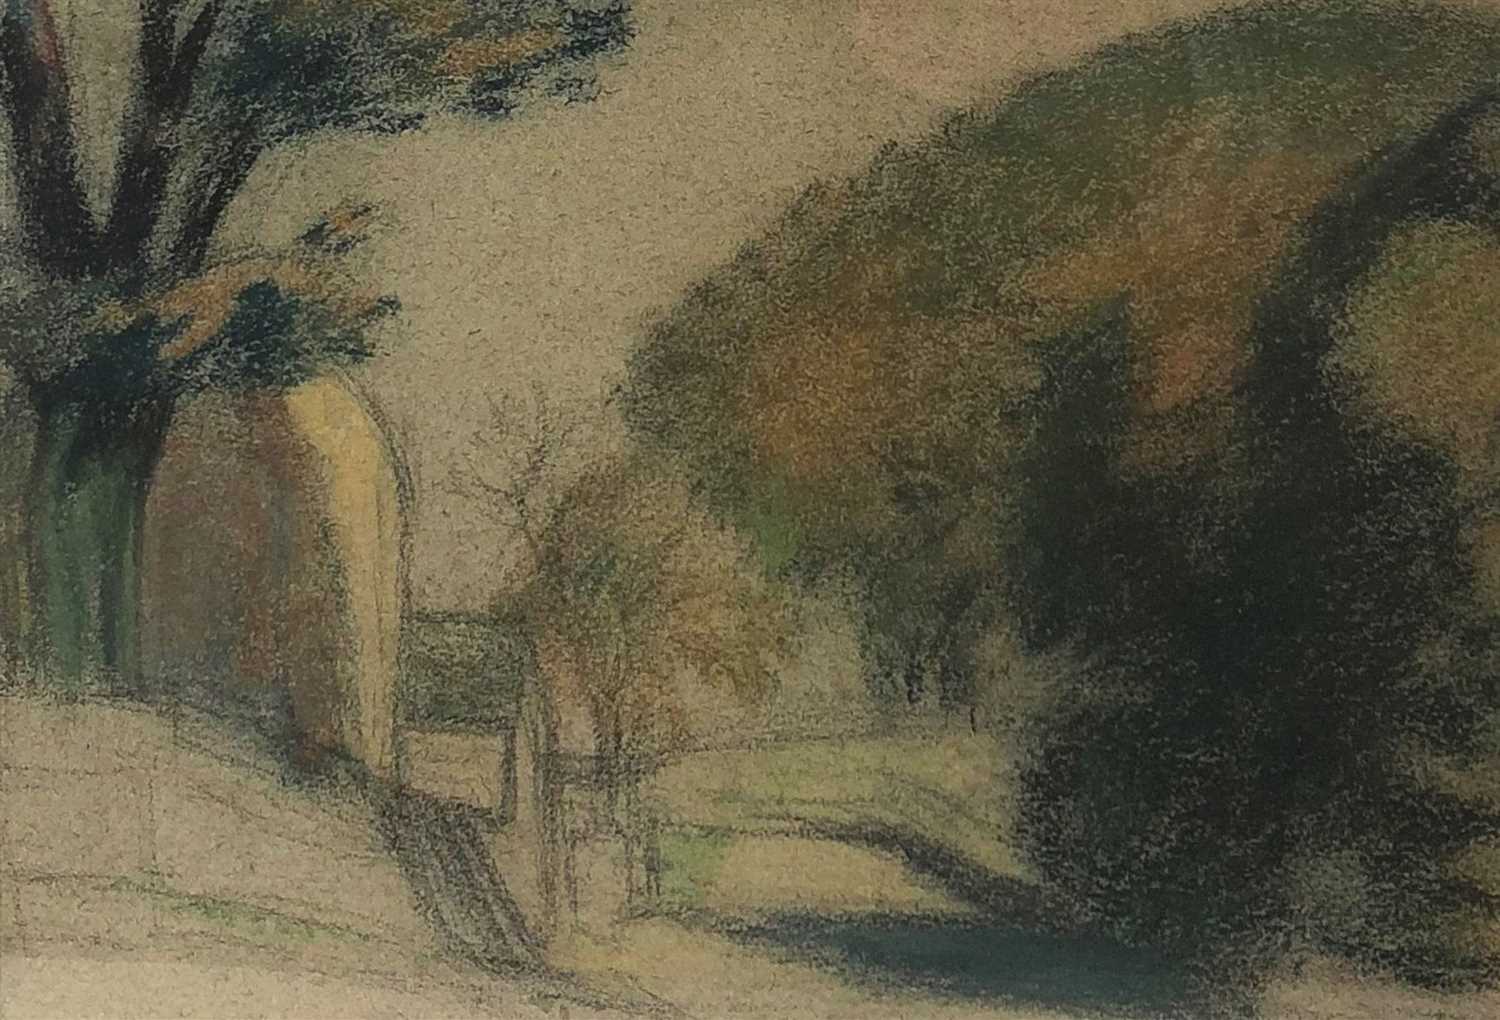 Lot 10 - Sir William Rothenstein (1872-1945), A Country Lane